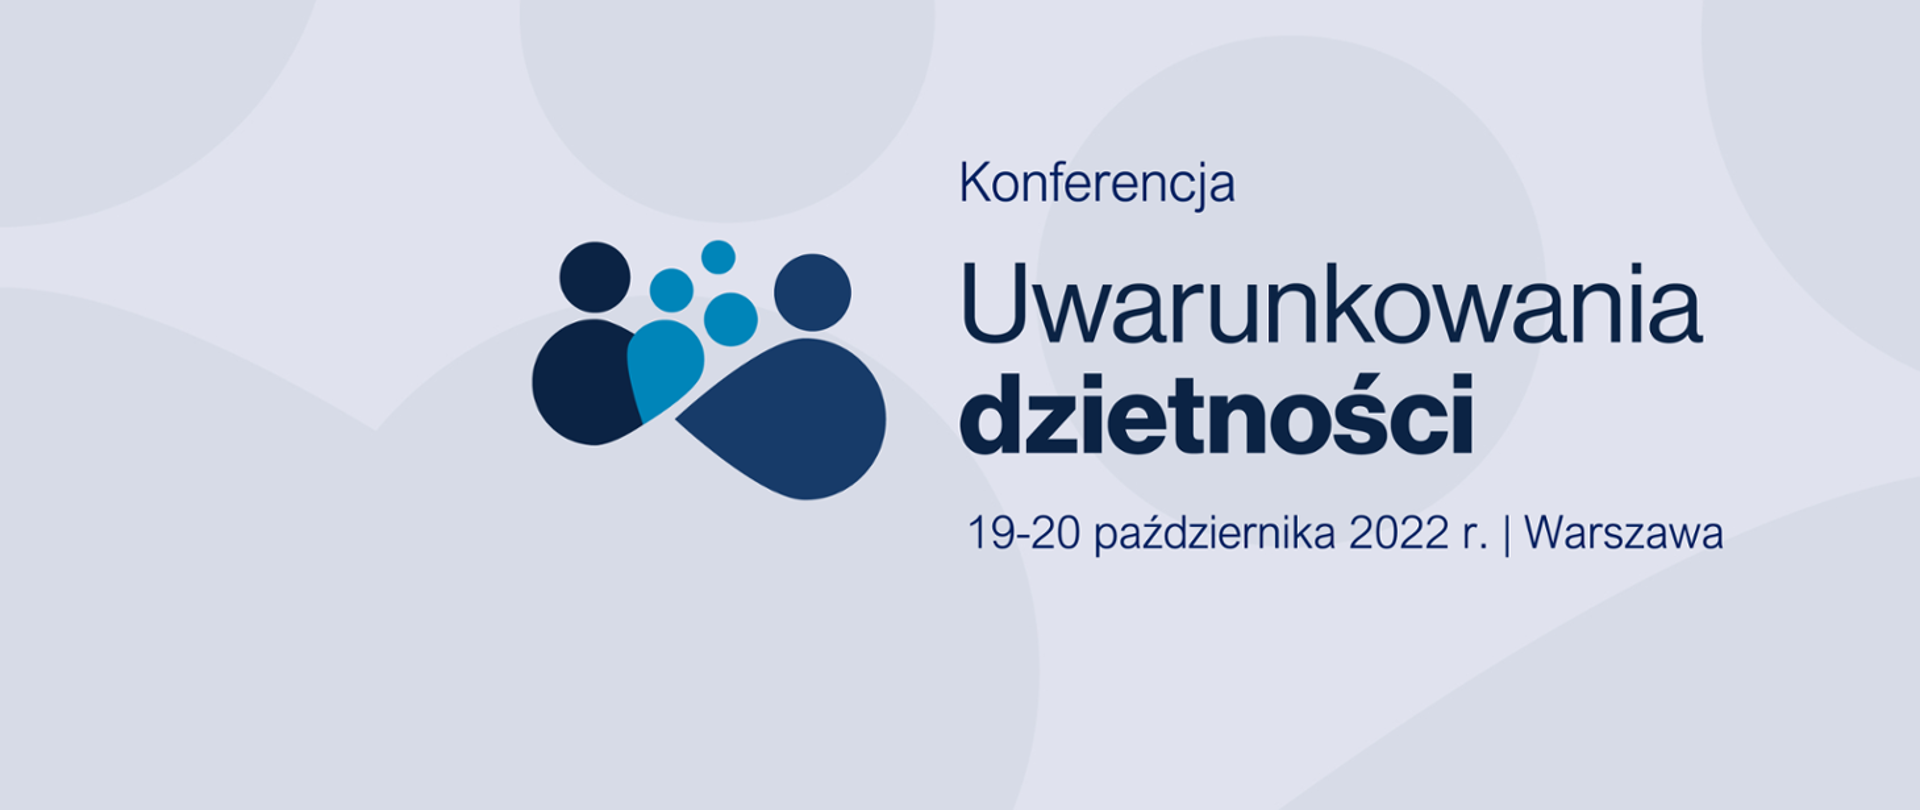 Scientific conference entitled “The conditions of fertility” – demographic experts for the development of the Polish demographic policy